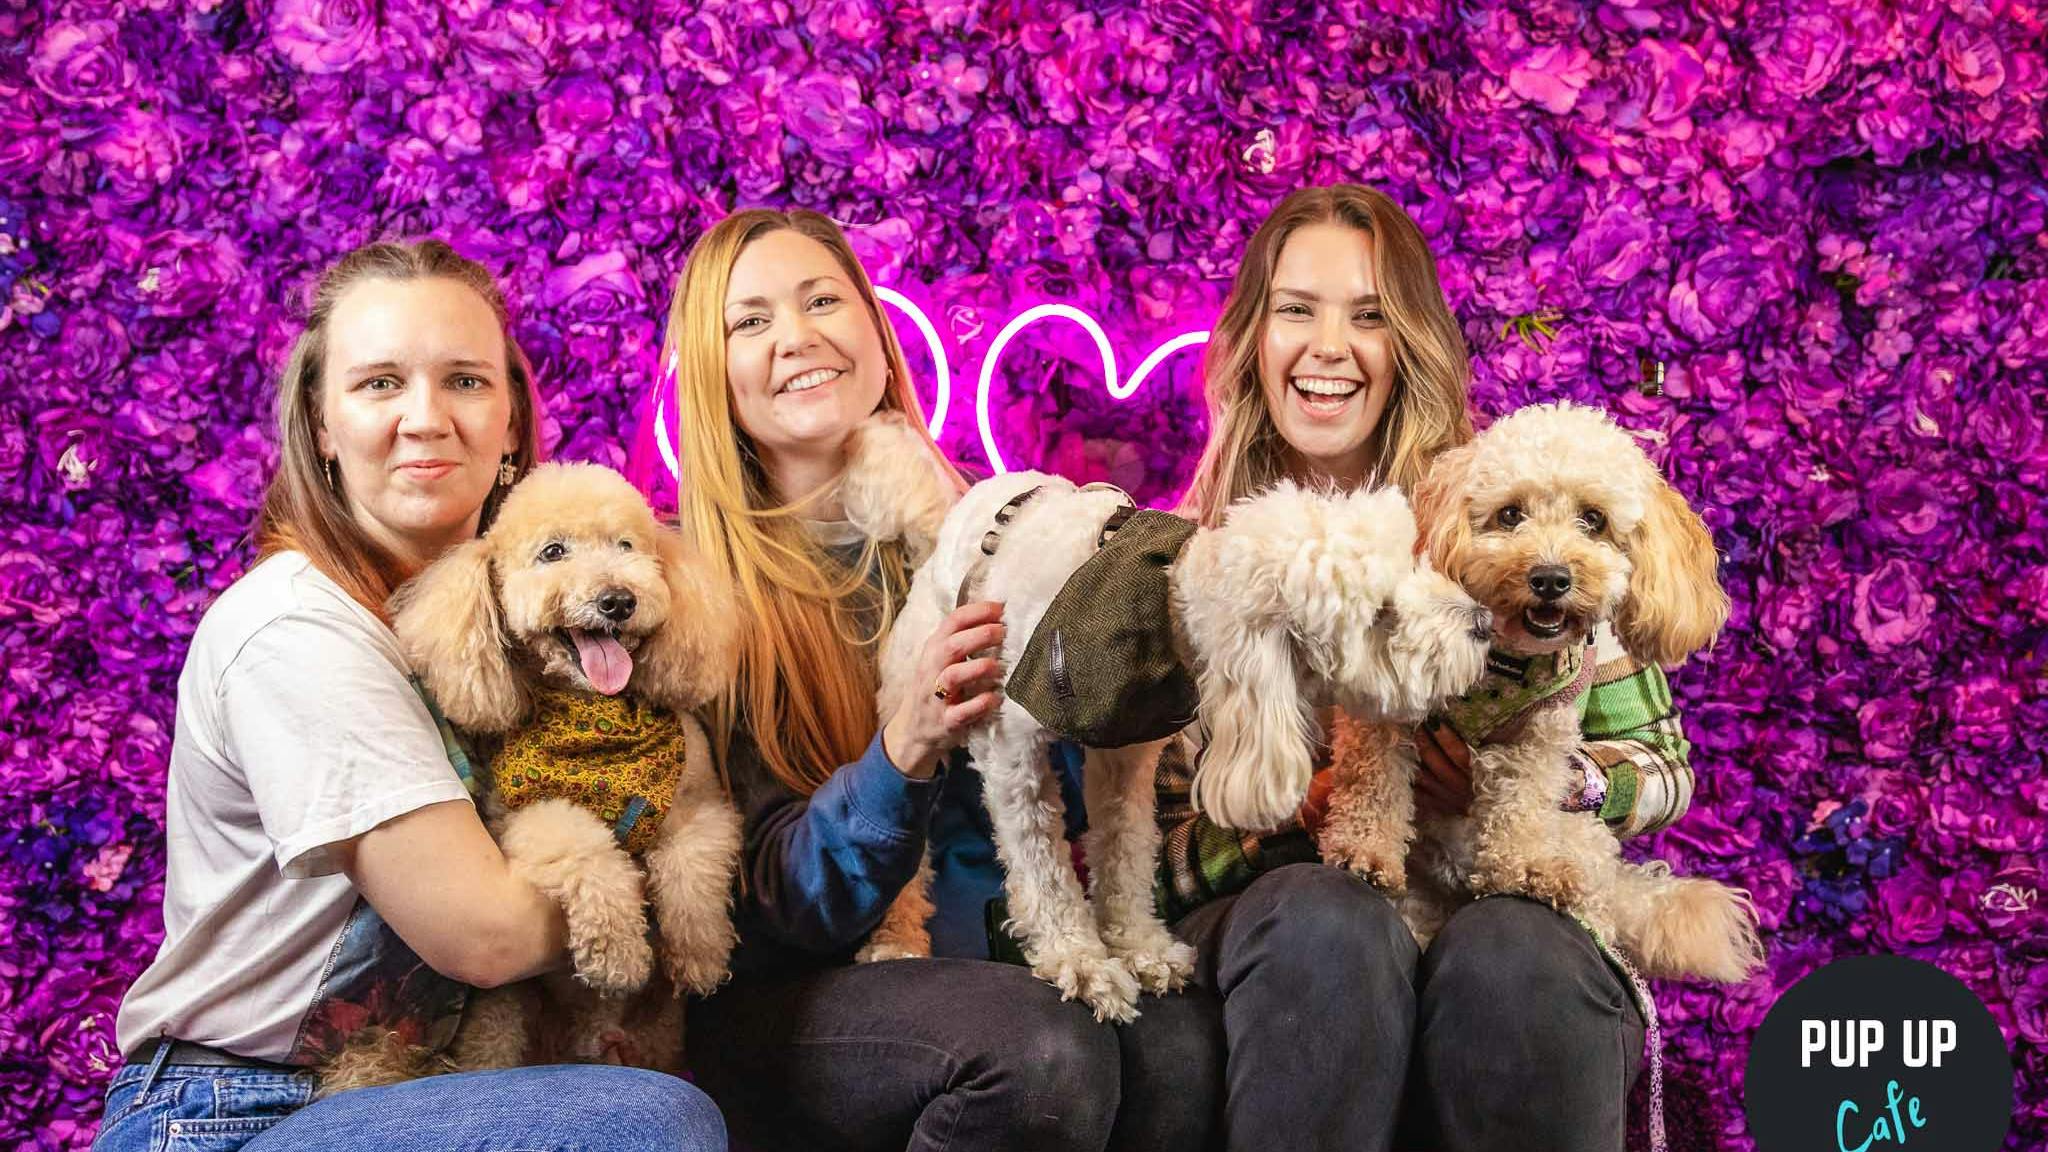 Pop-up dog cafe coming to Edinburgh with sessions for dachshunds, pugs and frenchies & doodles!